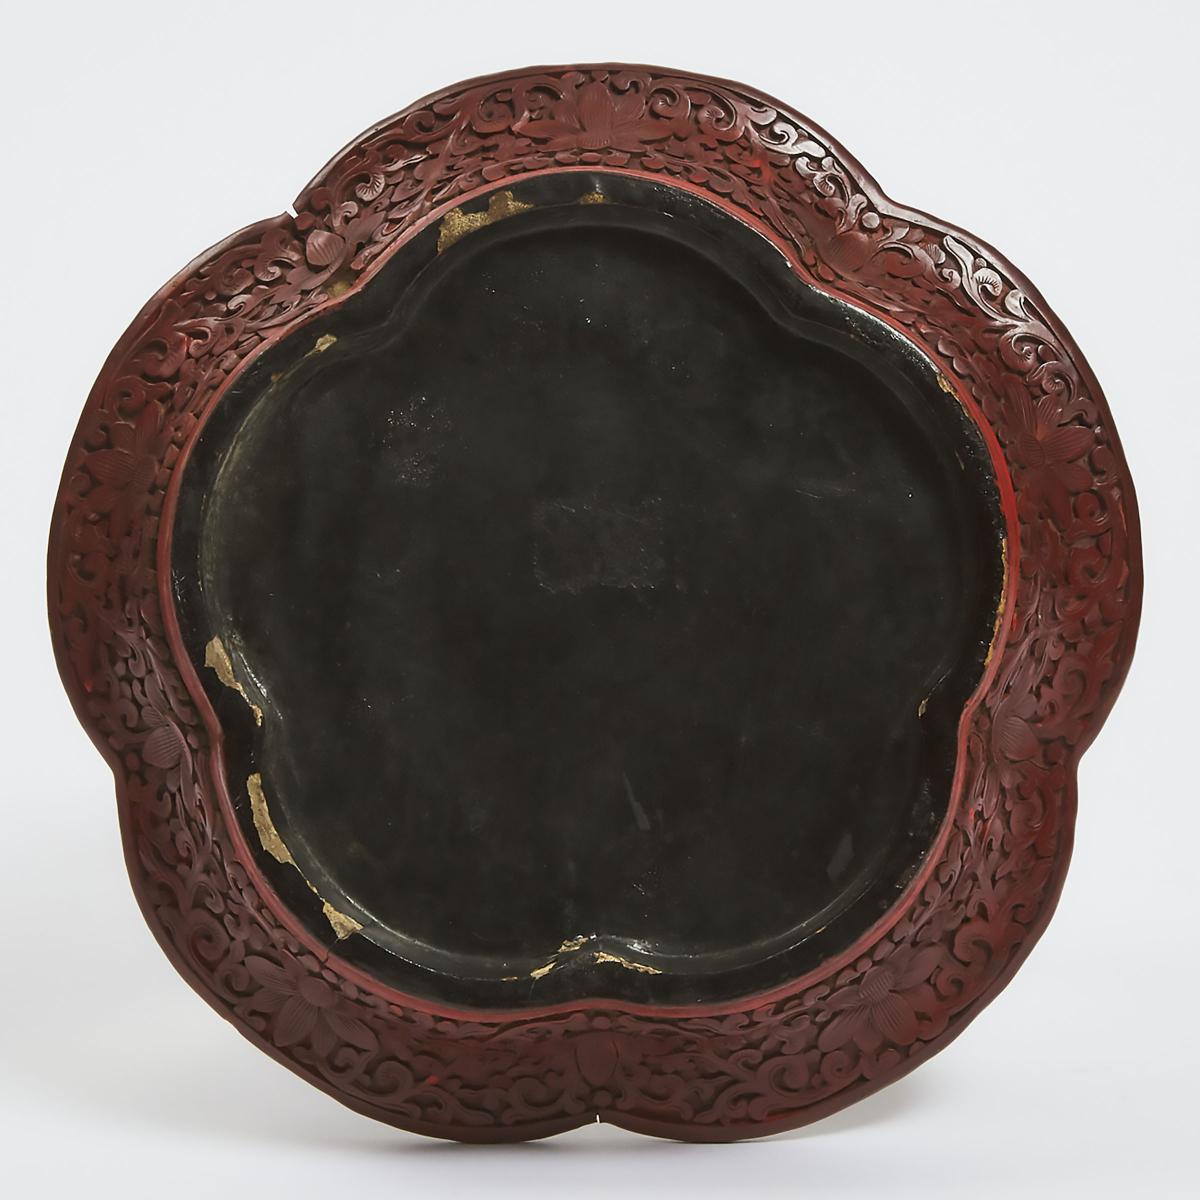 A Carved Cinnabar Lacquer Lobed Dish, Qing Dynasty, 19th Century, 晚清 十九世纪 剔红松下高仕图花口盘, diameter 10.1 - Image 2 of 2